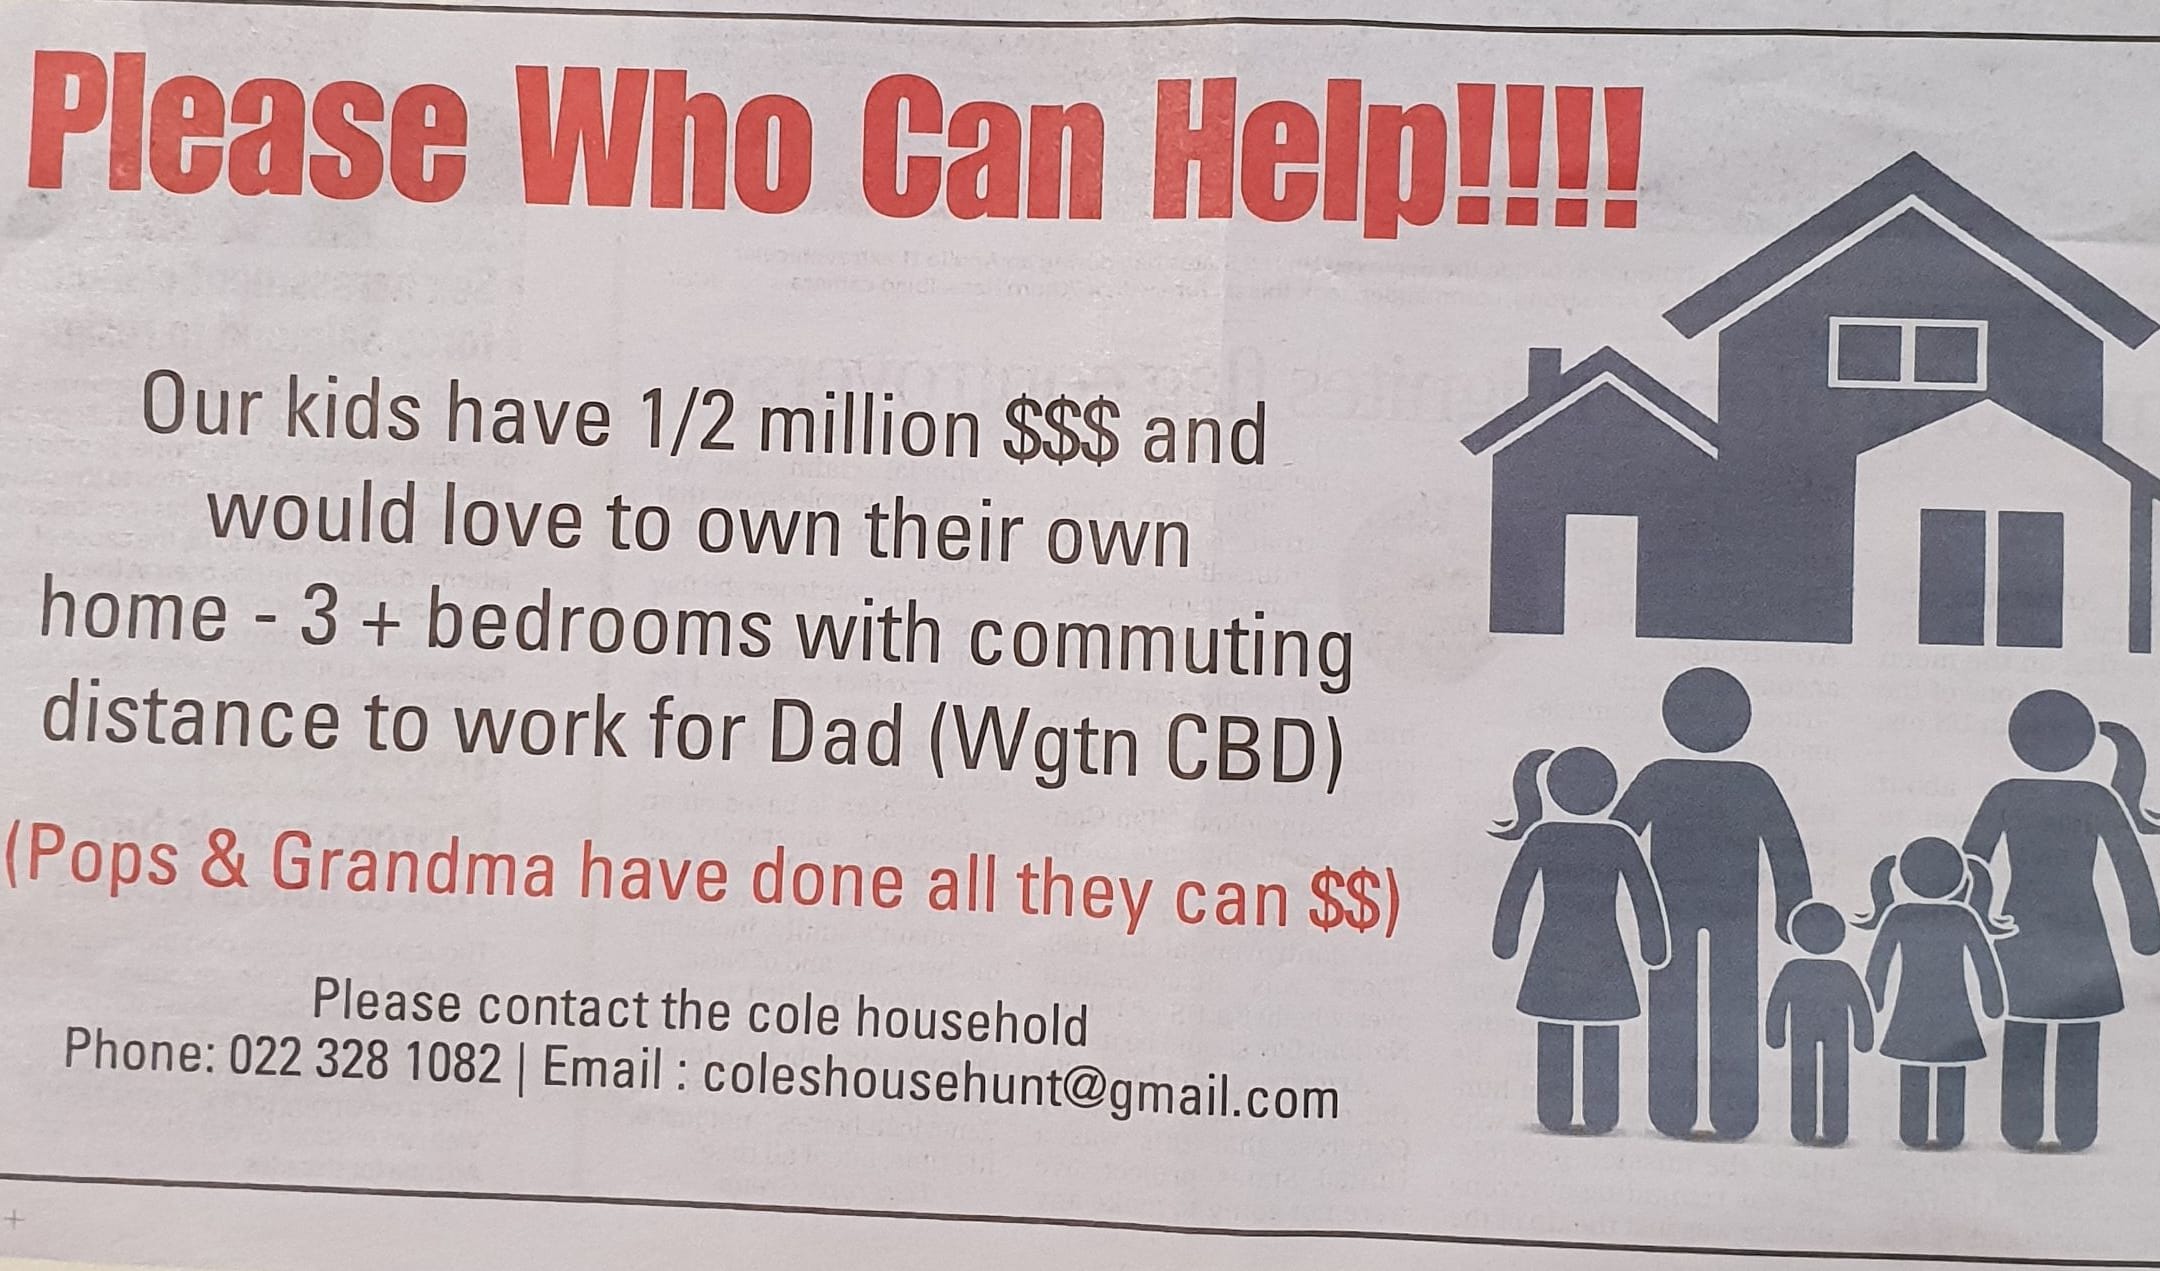 A family has taken a novel approach to getting on the property ladder by placing an ad in the newspaper seeking private sellers.